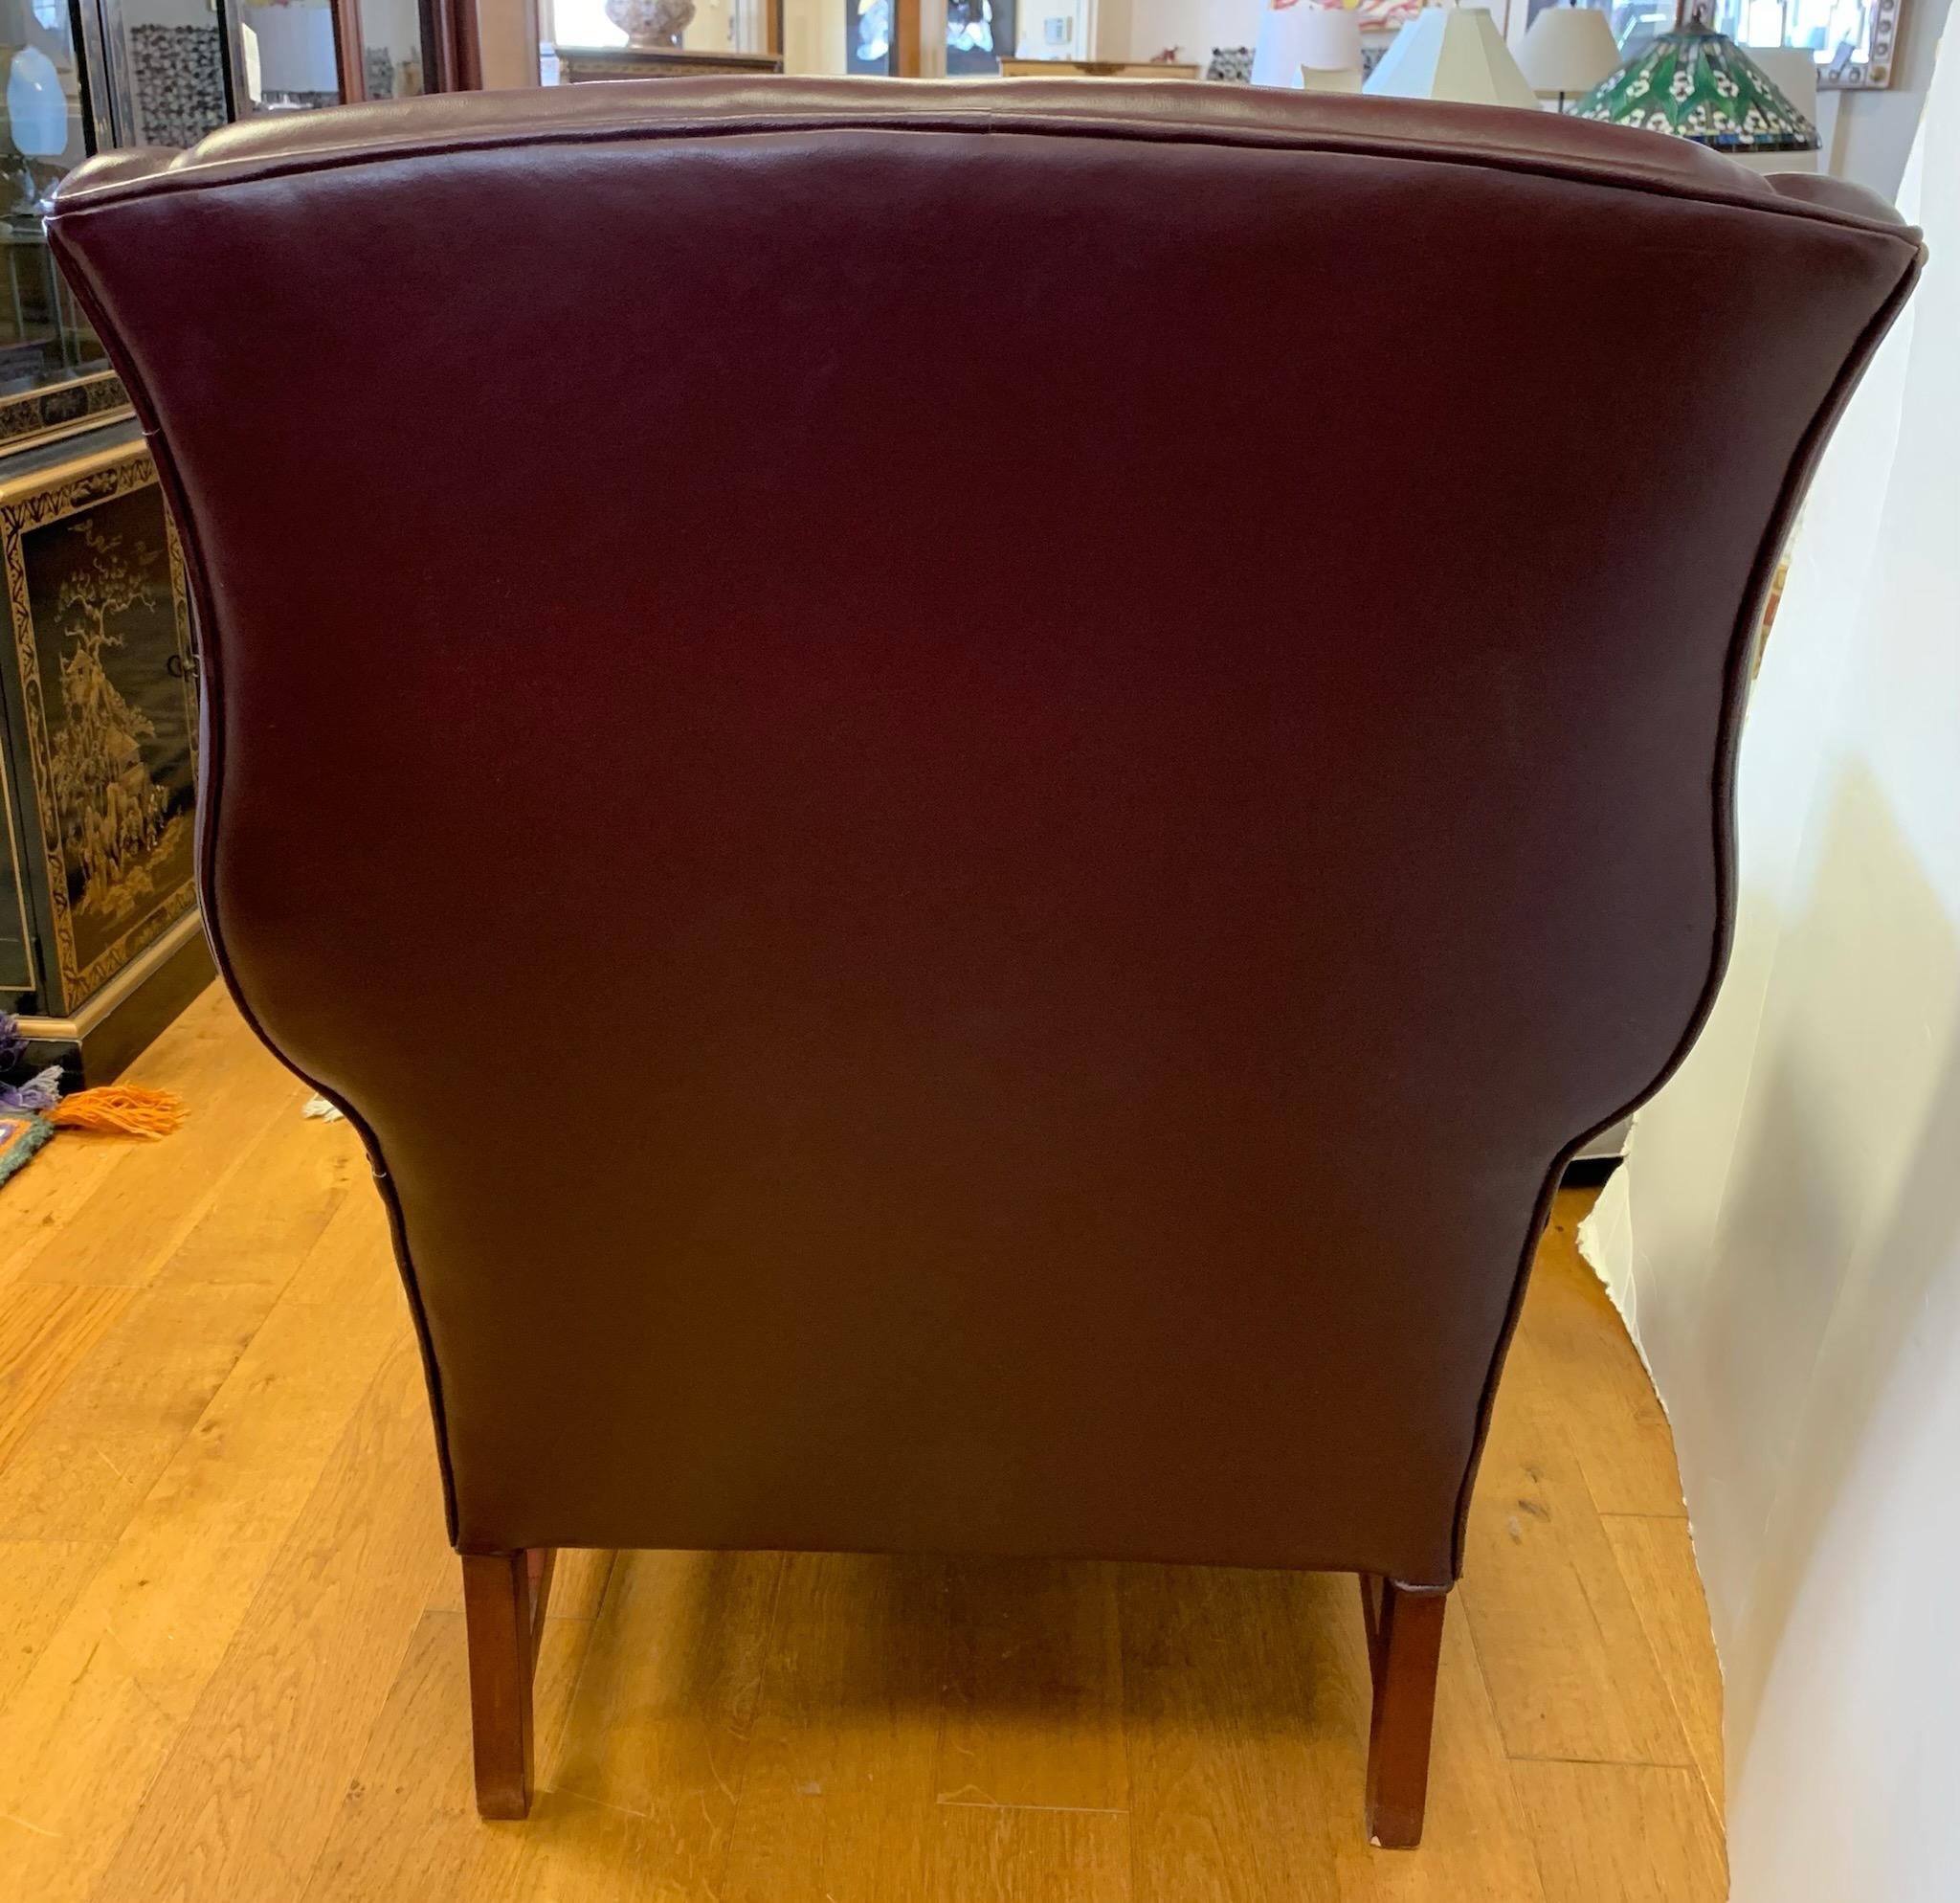 20th Century Burgundy Leather Wingback Chair and Ottoman, 2 Pcs